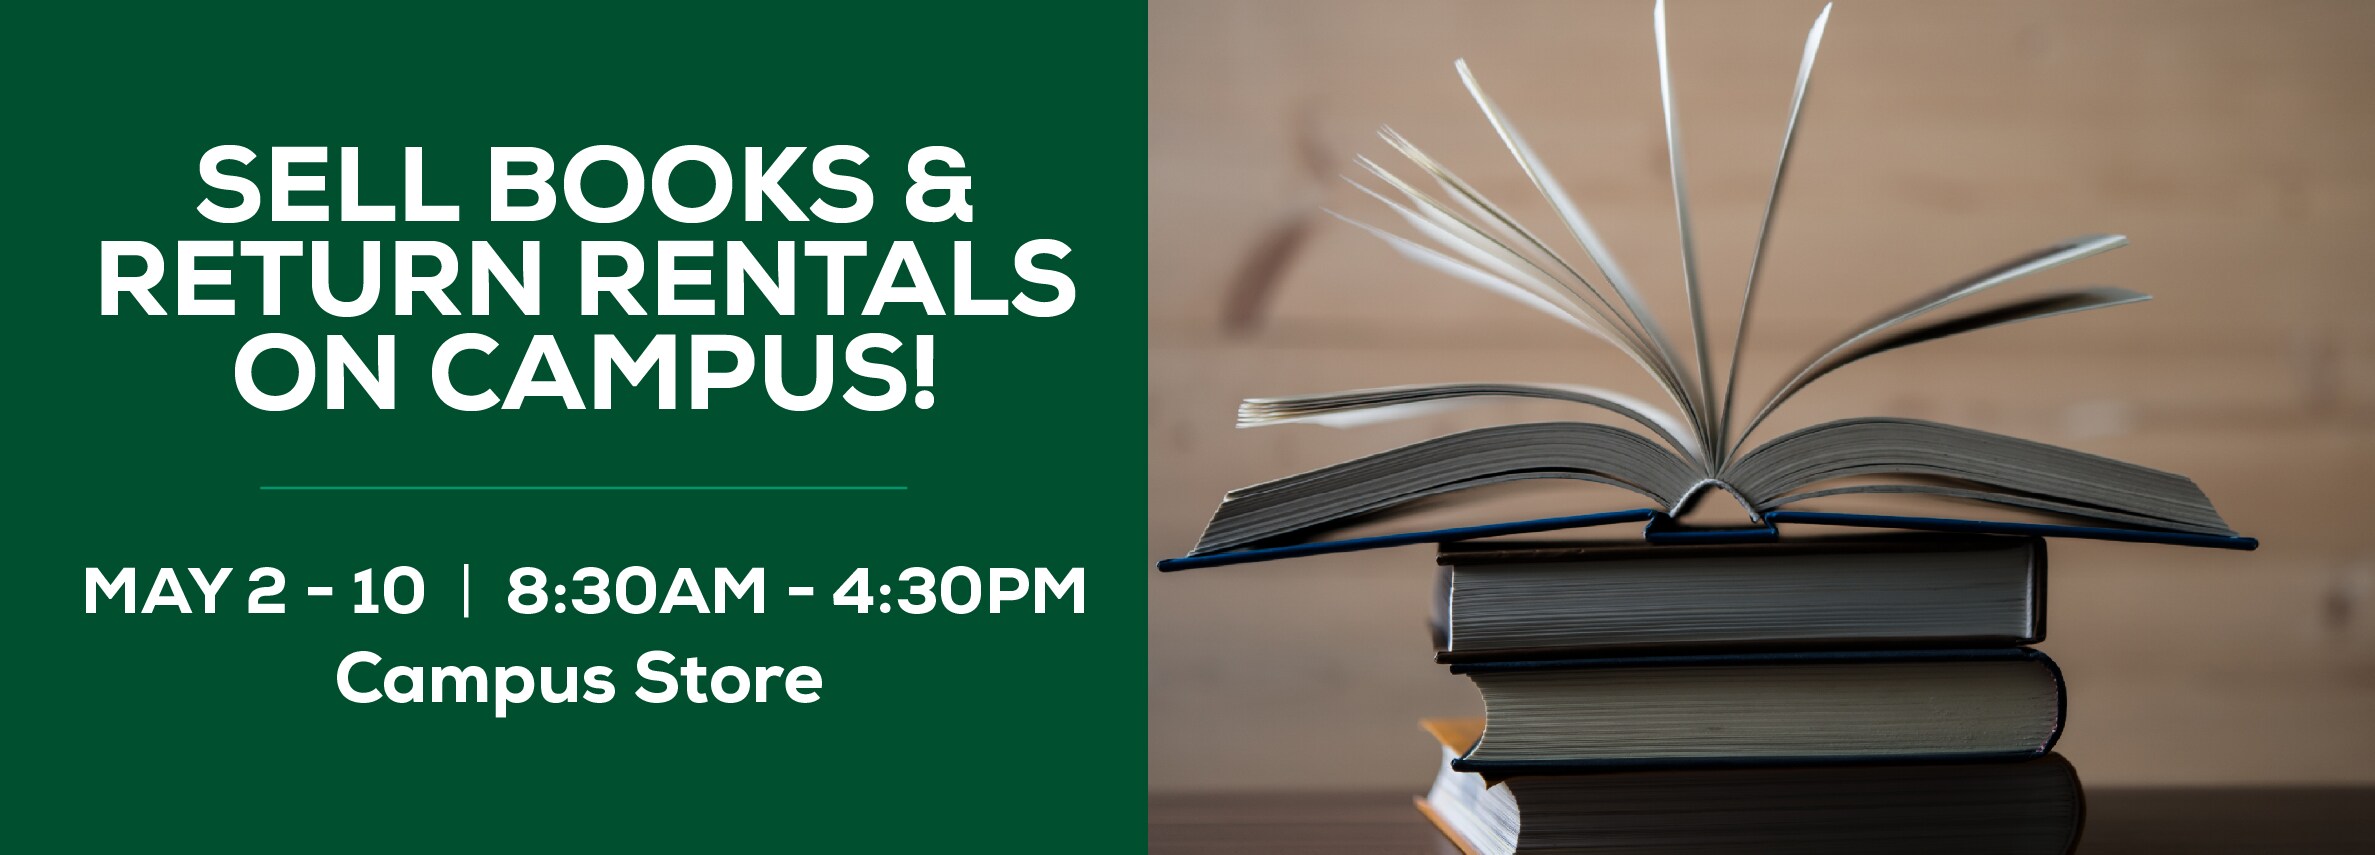 Sell books and return rentals on campus! May 2nd through 10th. 8:30am to 4:30pm at the Morrisville Campus Store.